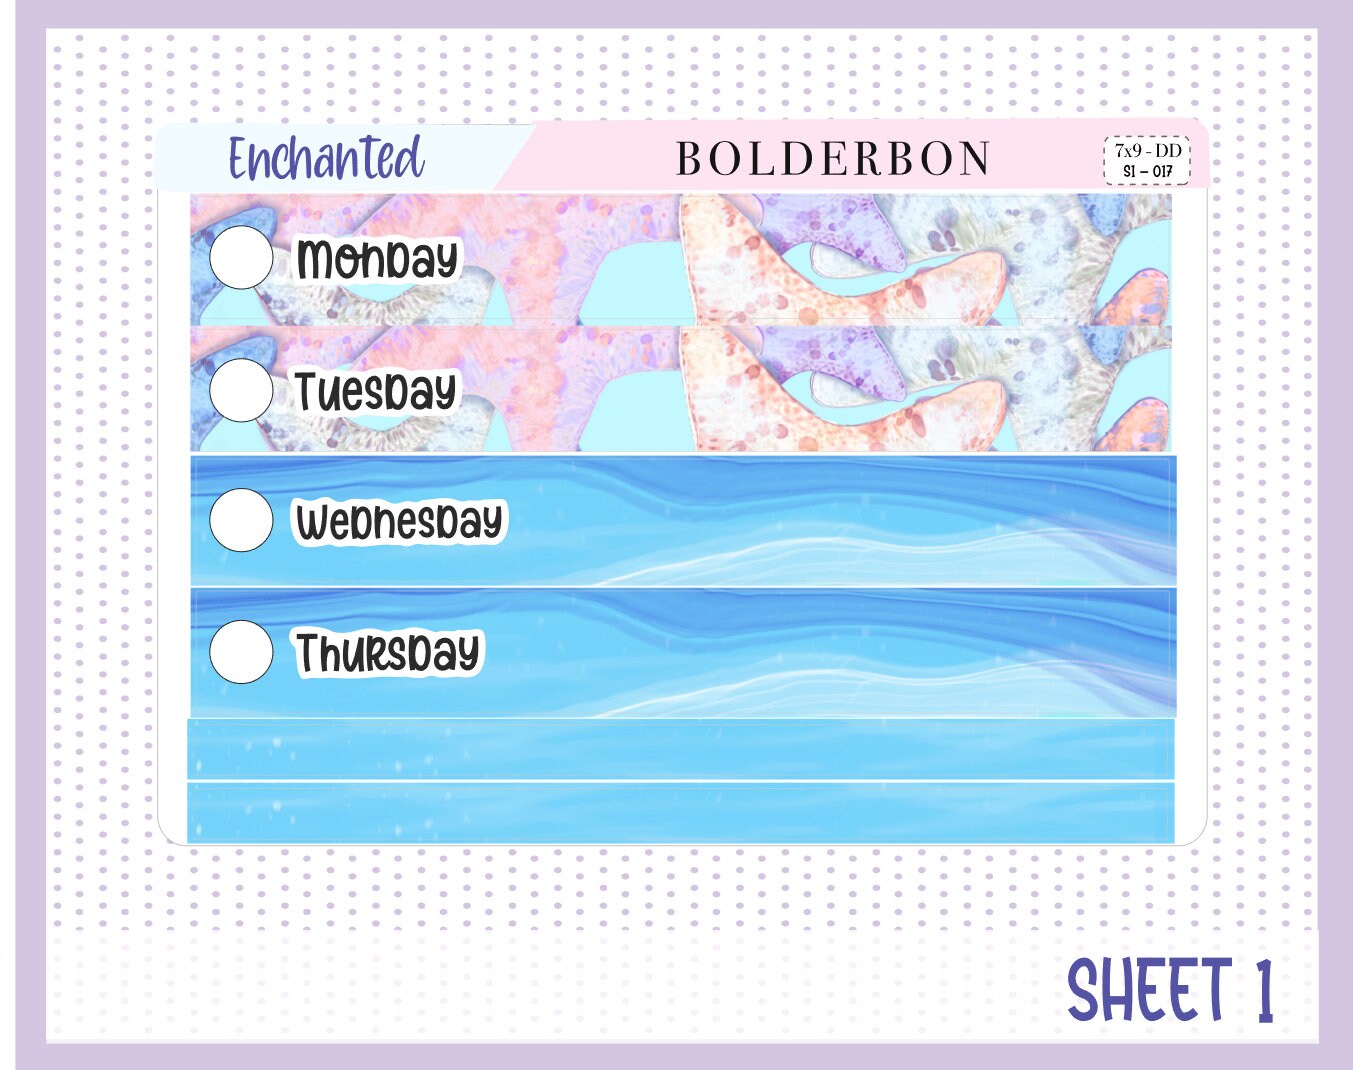 ENCHANTED "7x9 Daily Duo" || Weekly Planner Sticker Kit for Erin Condren